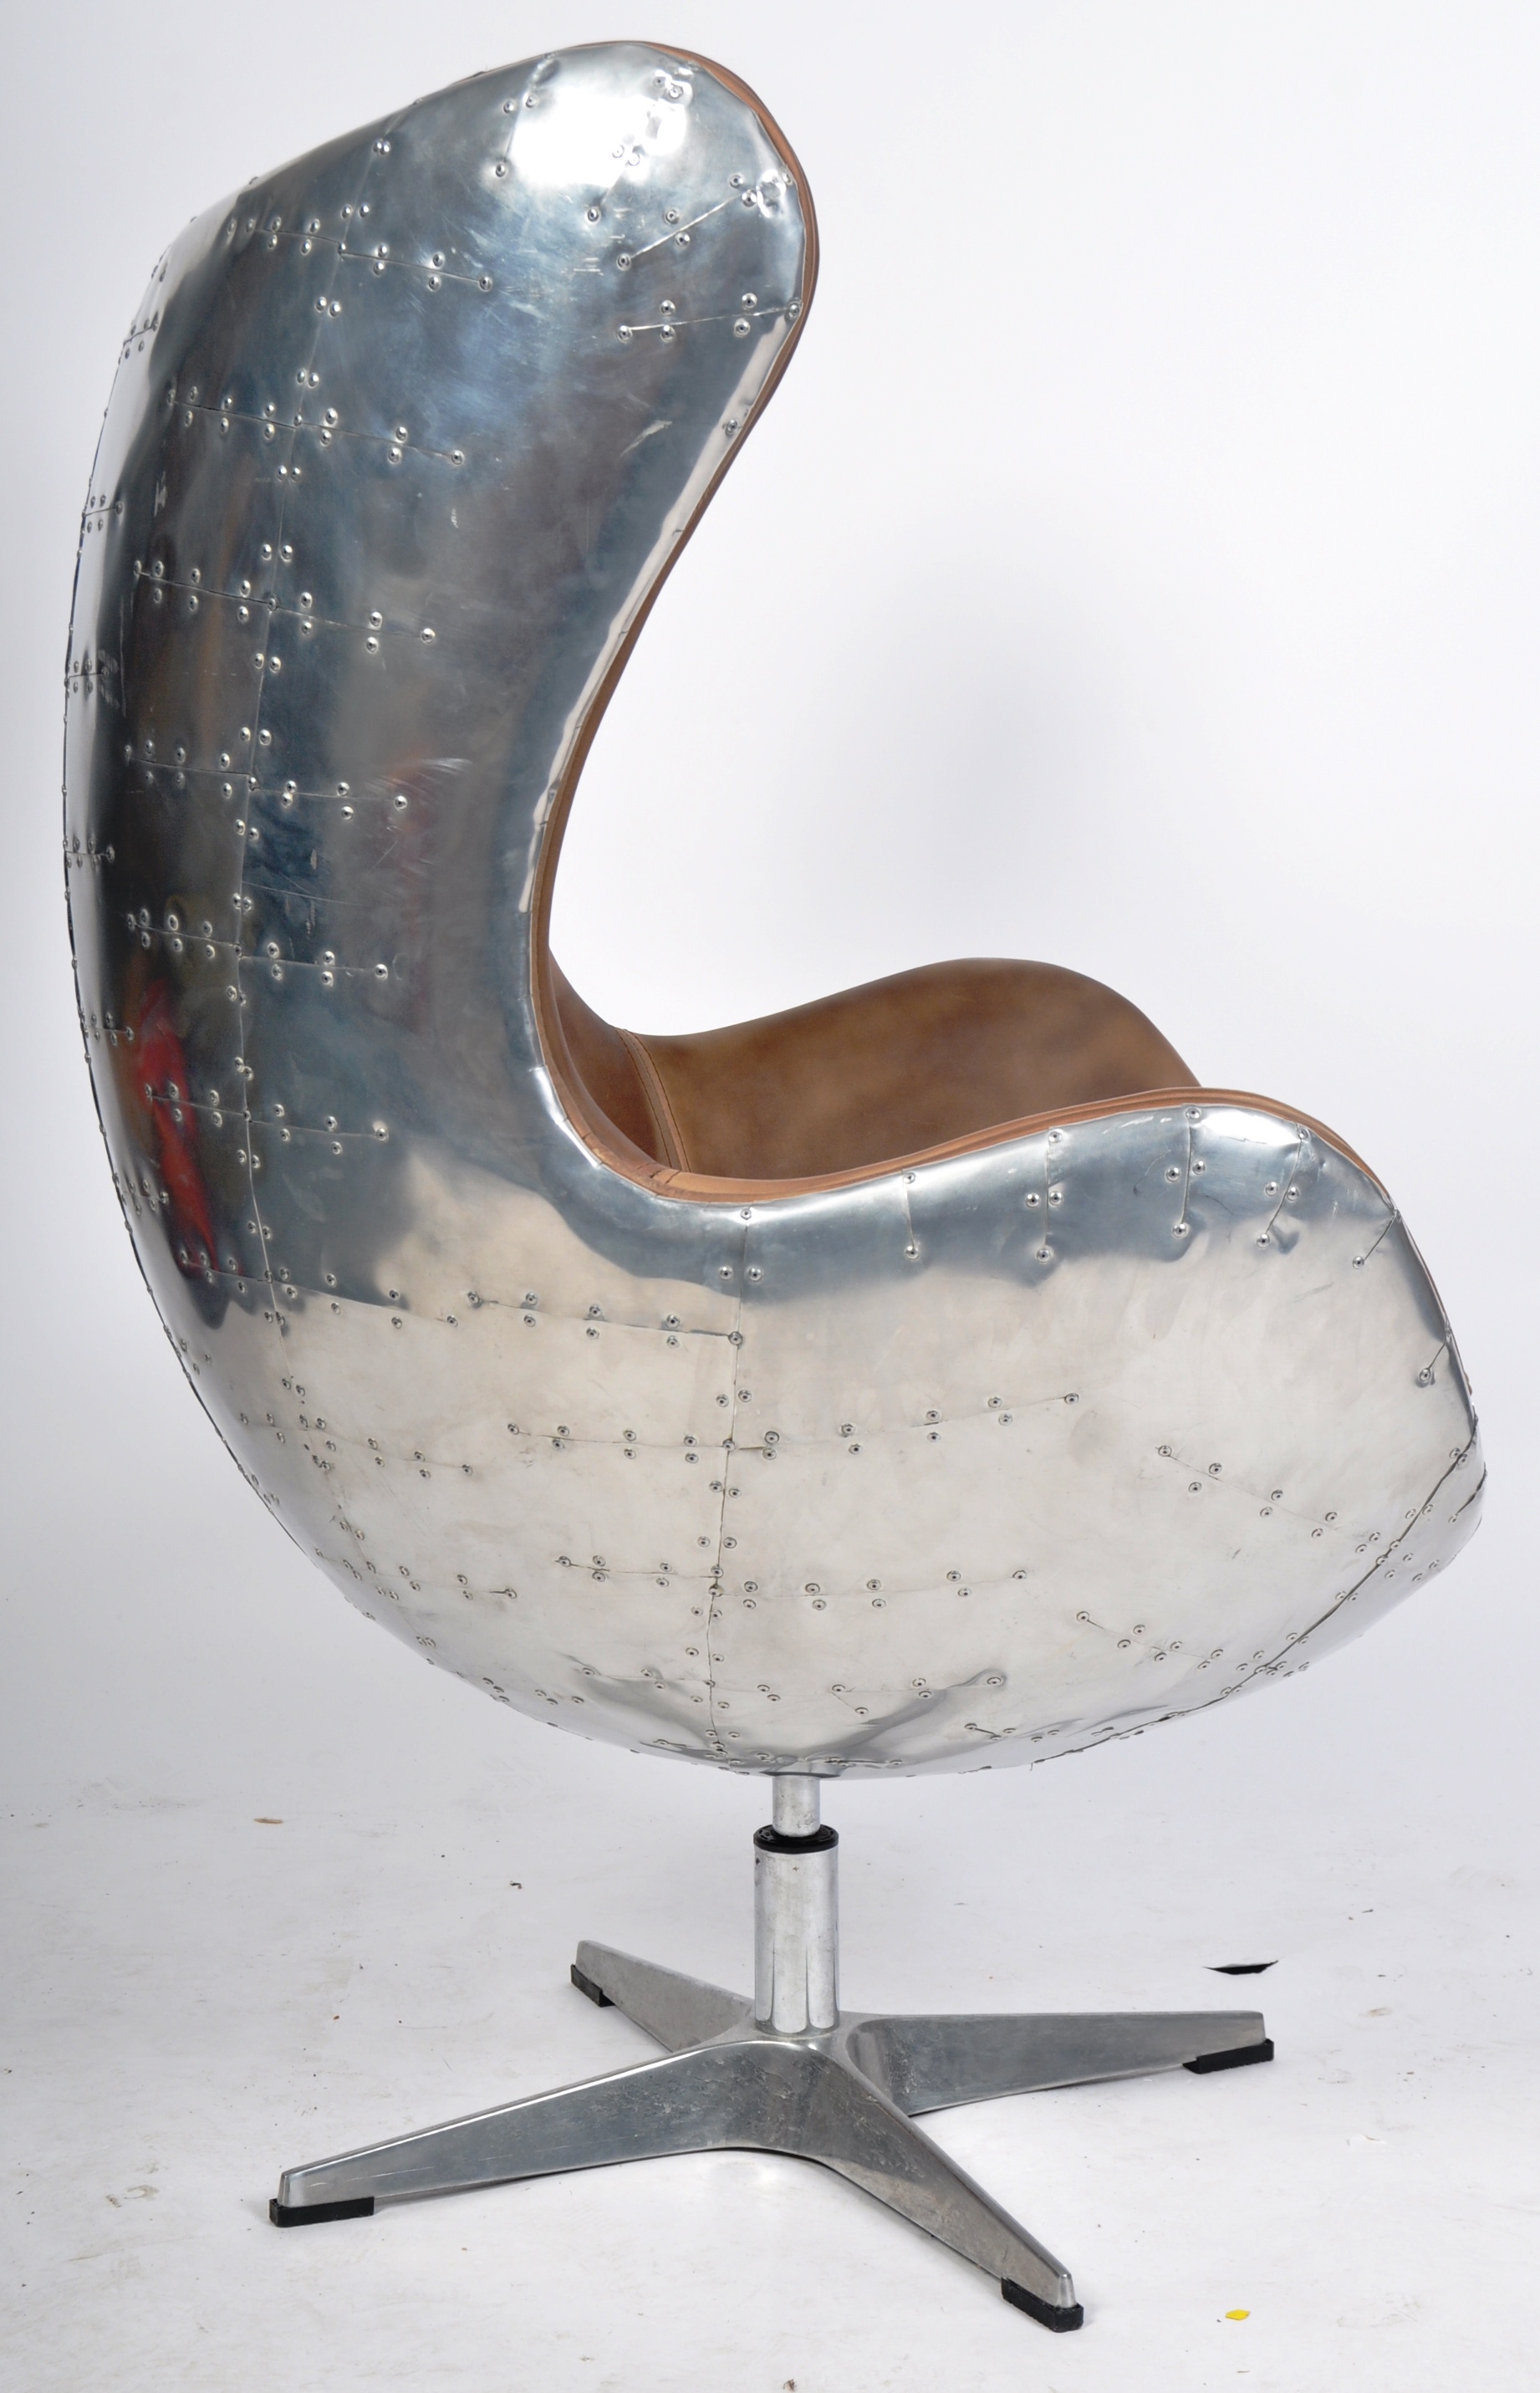 ANDREW MARTIN FURNITURE AVIATOR CHROME & LEATHER CHAIR - Image 6 of 9